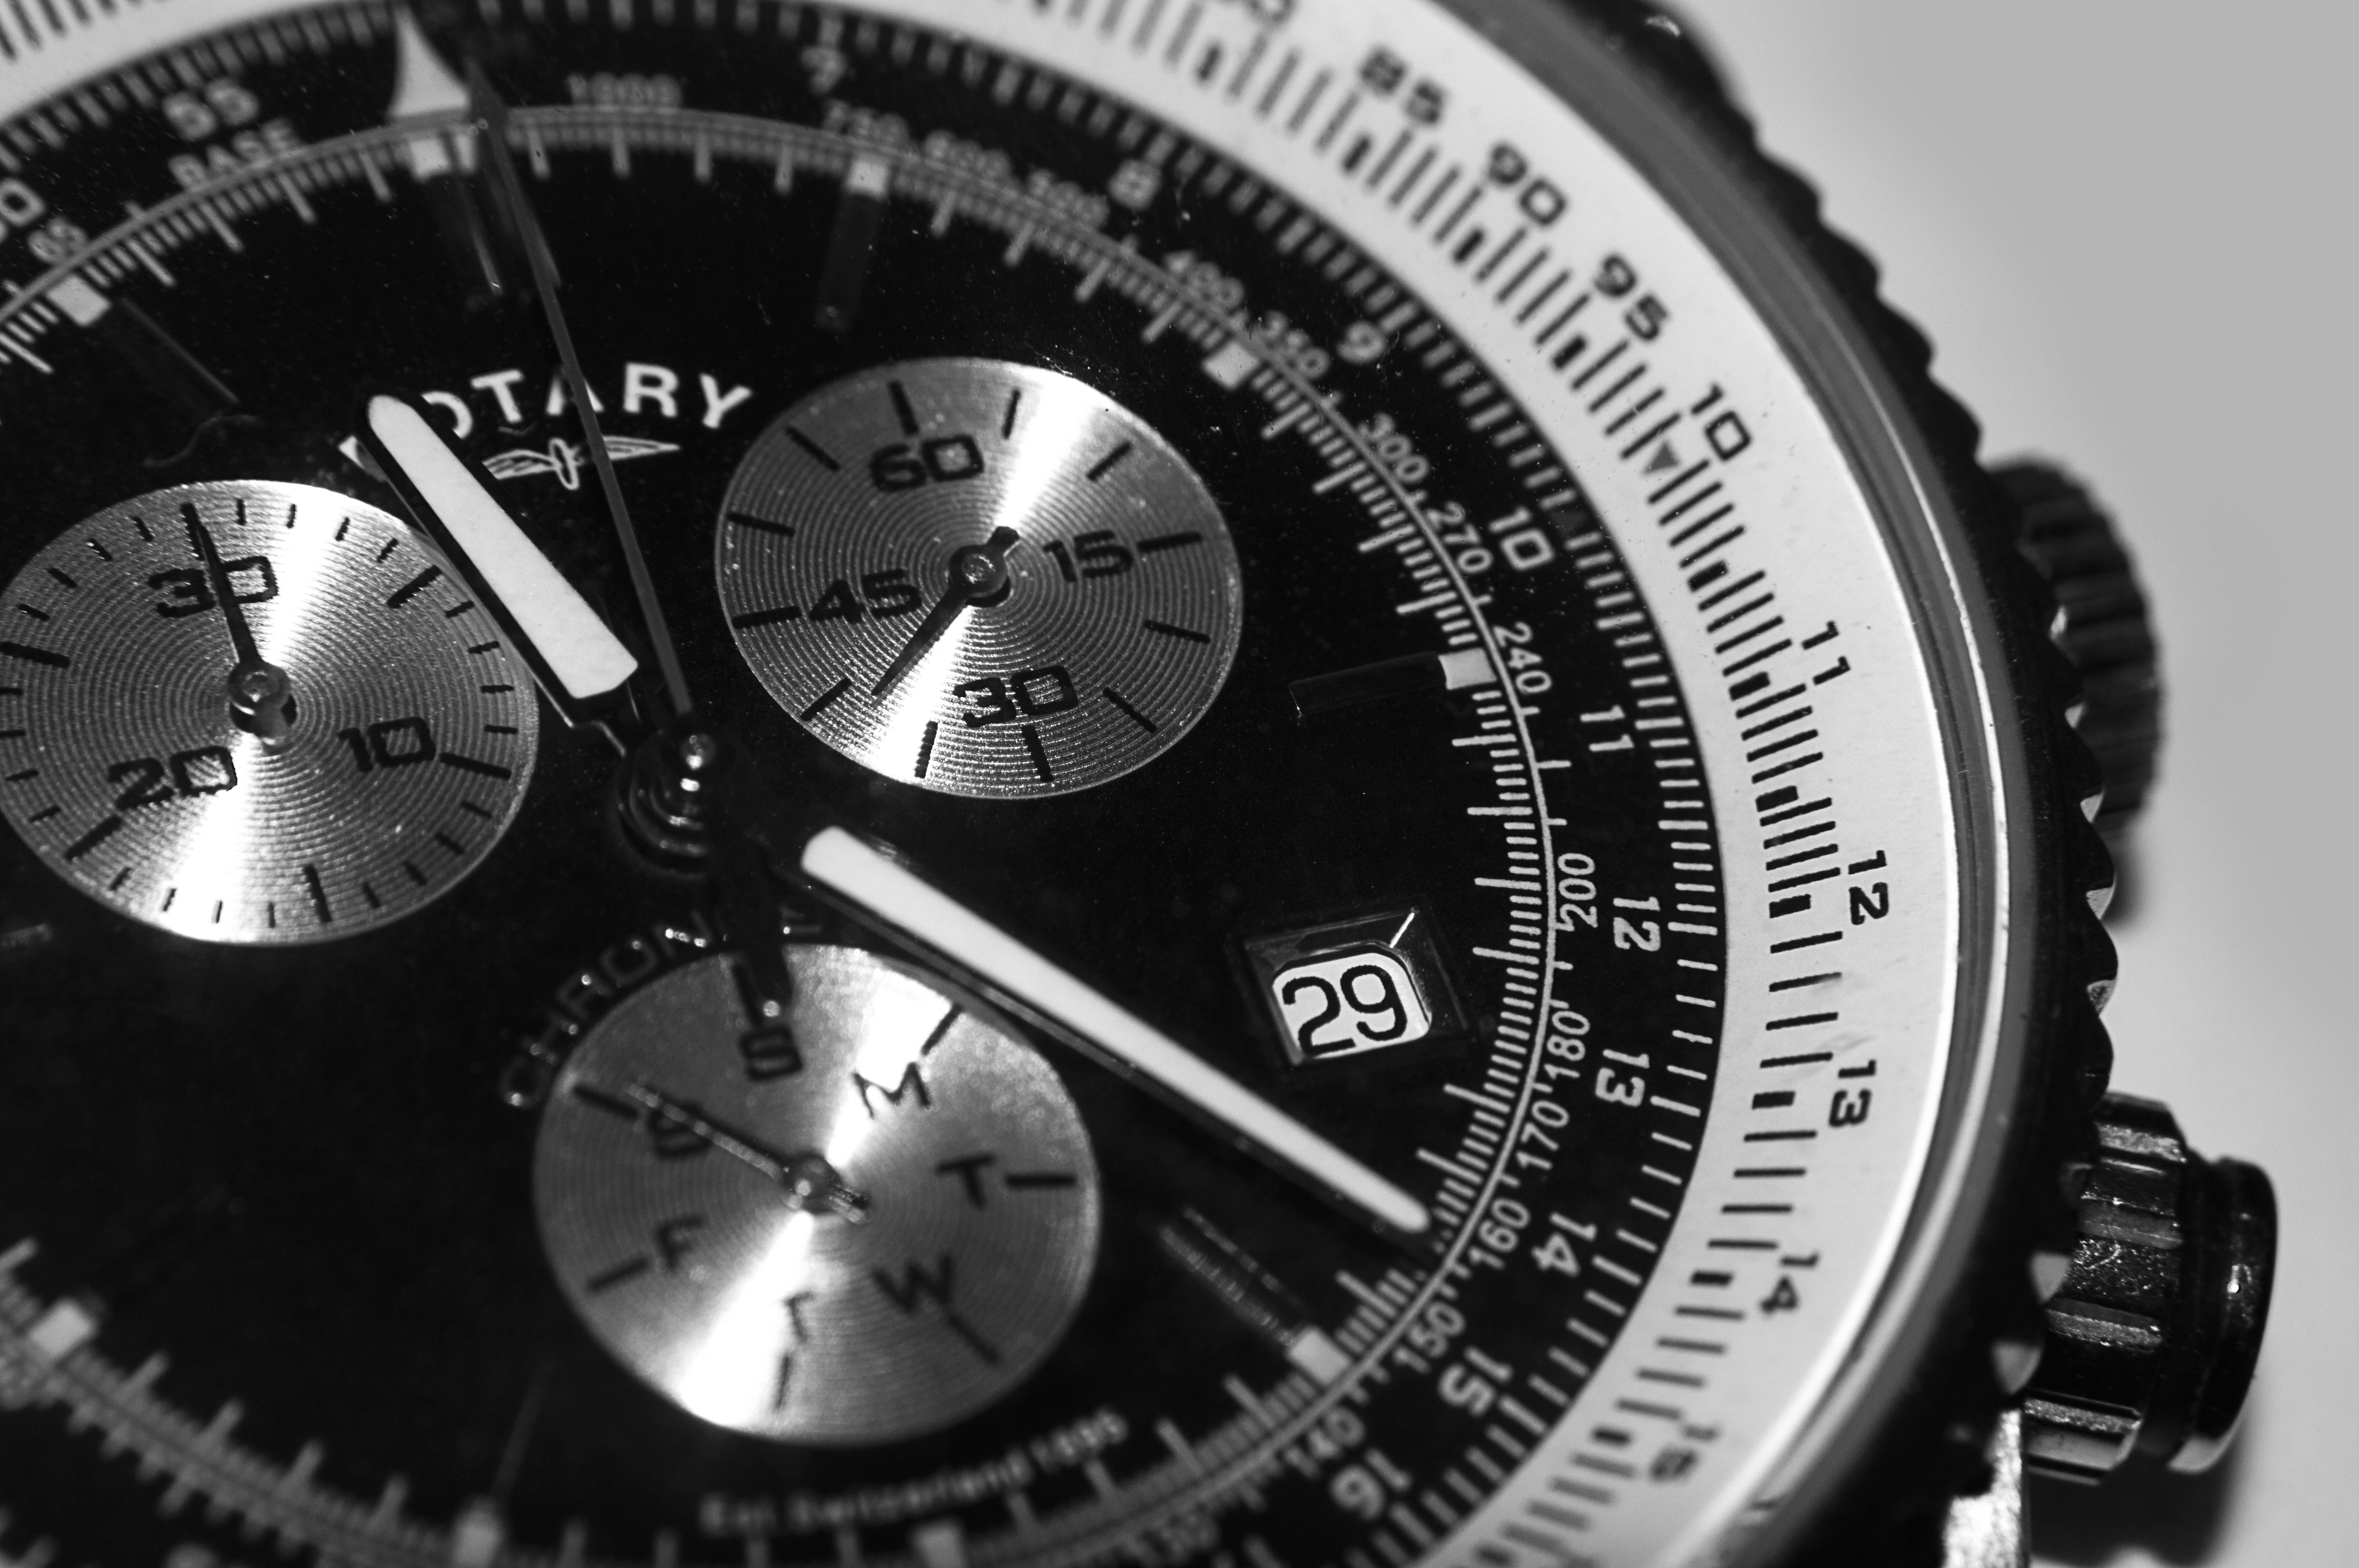 Free stock photo of watch black and white monochrome